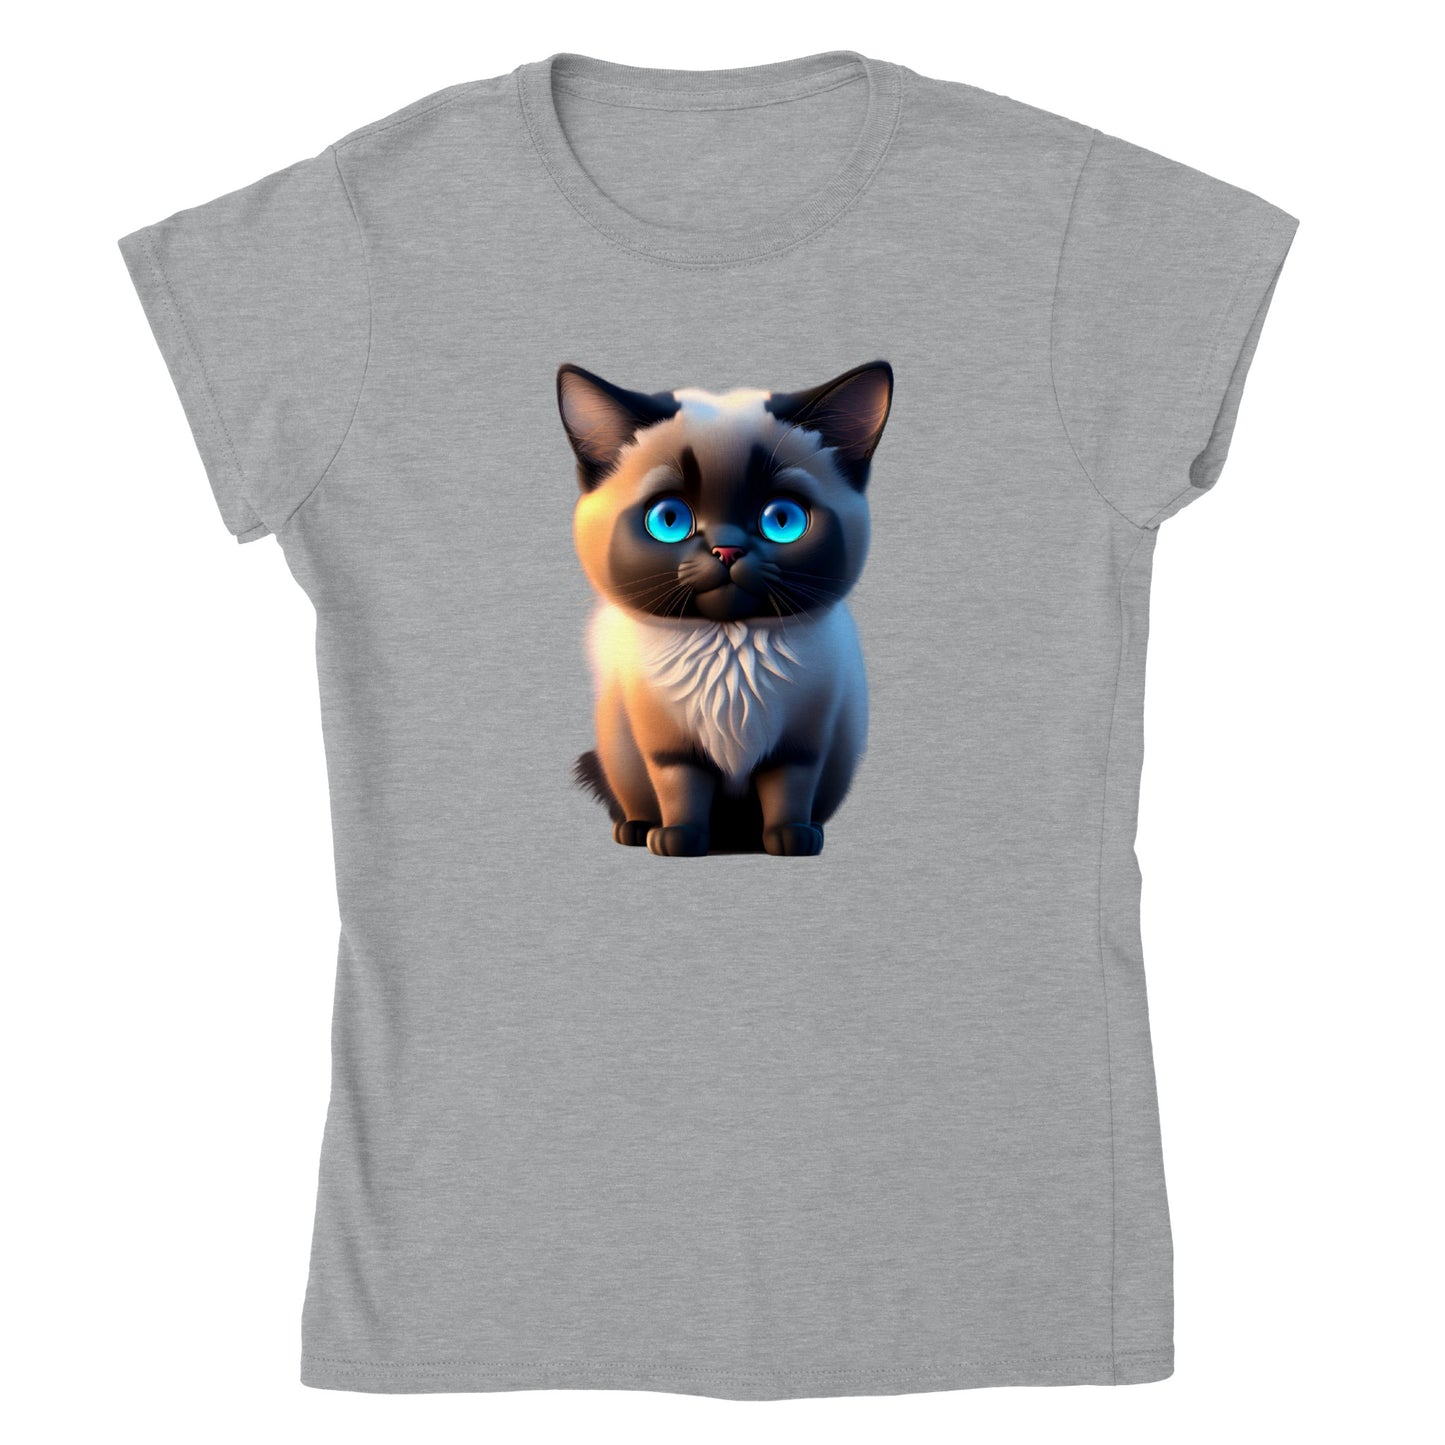 Adorable, Cool, Cute Cats and Kittens Toy - Classic Women’s Crewneck T-Shirt 41